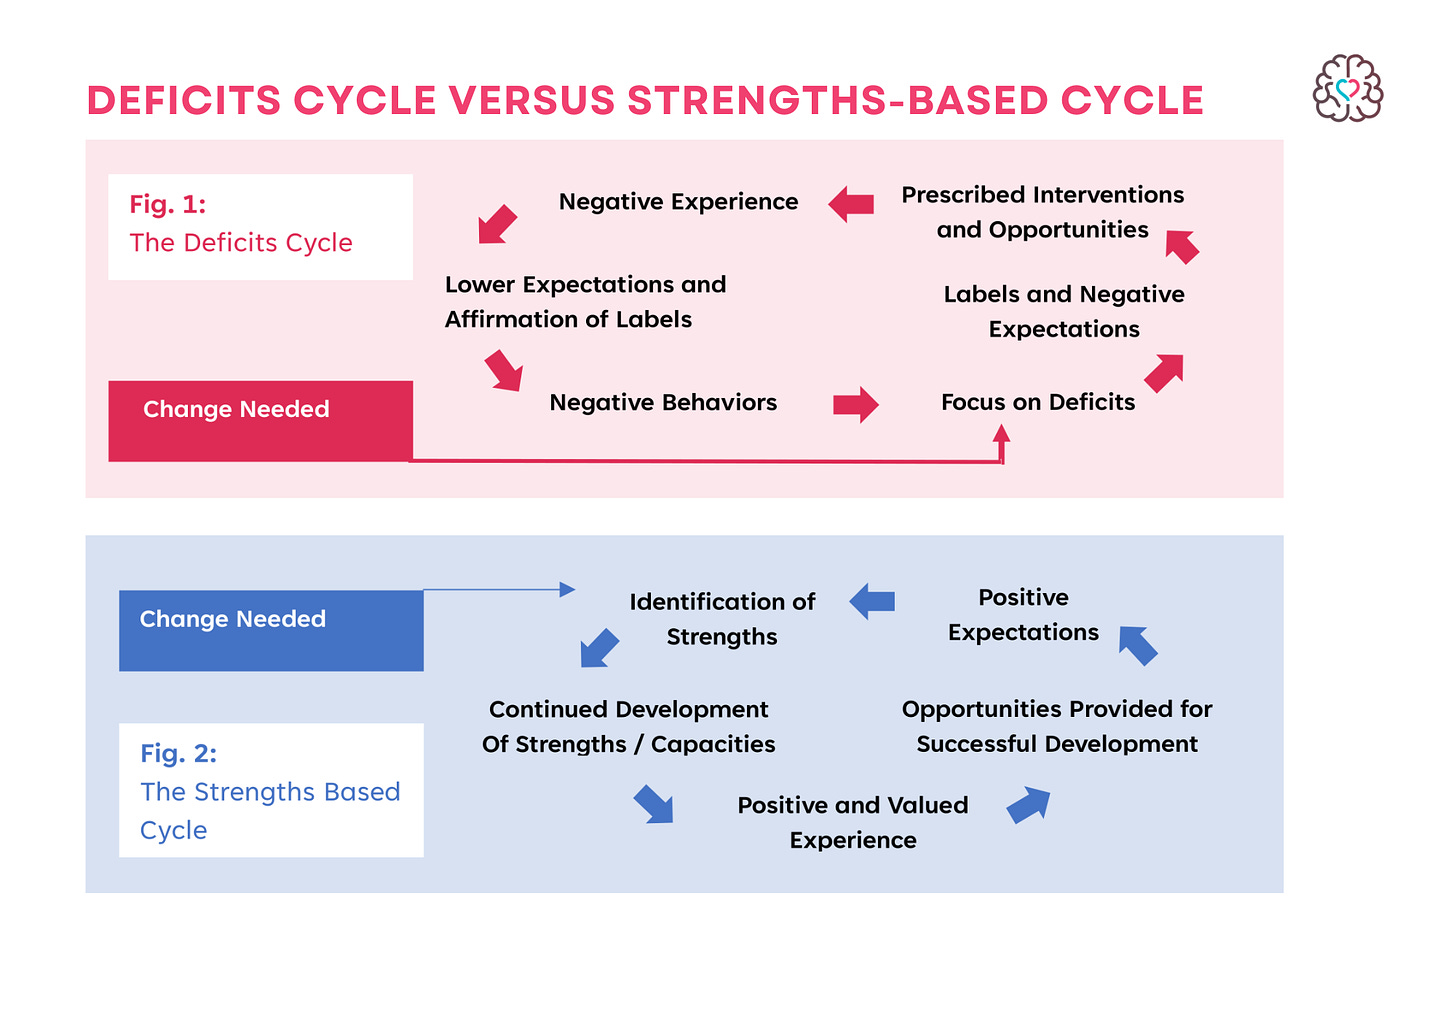 Deficits cycle versus strengths-based cycle